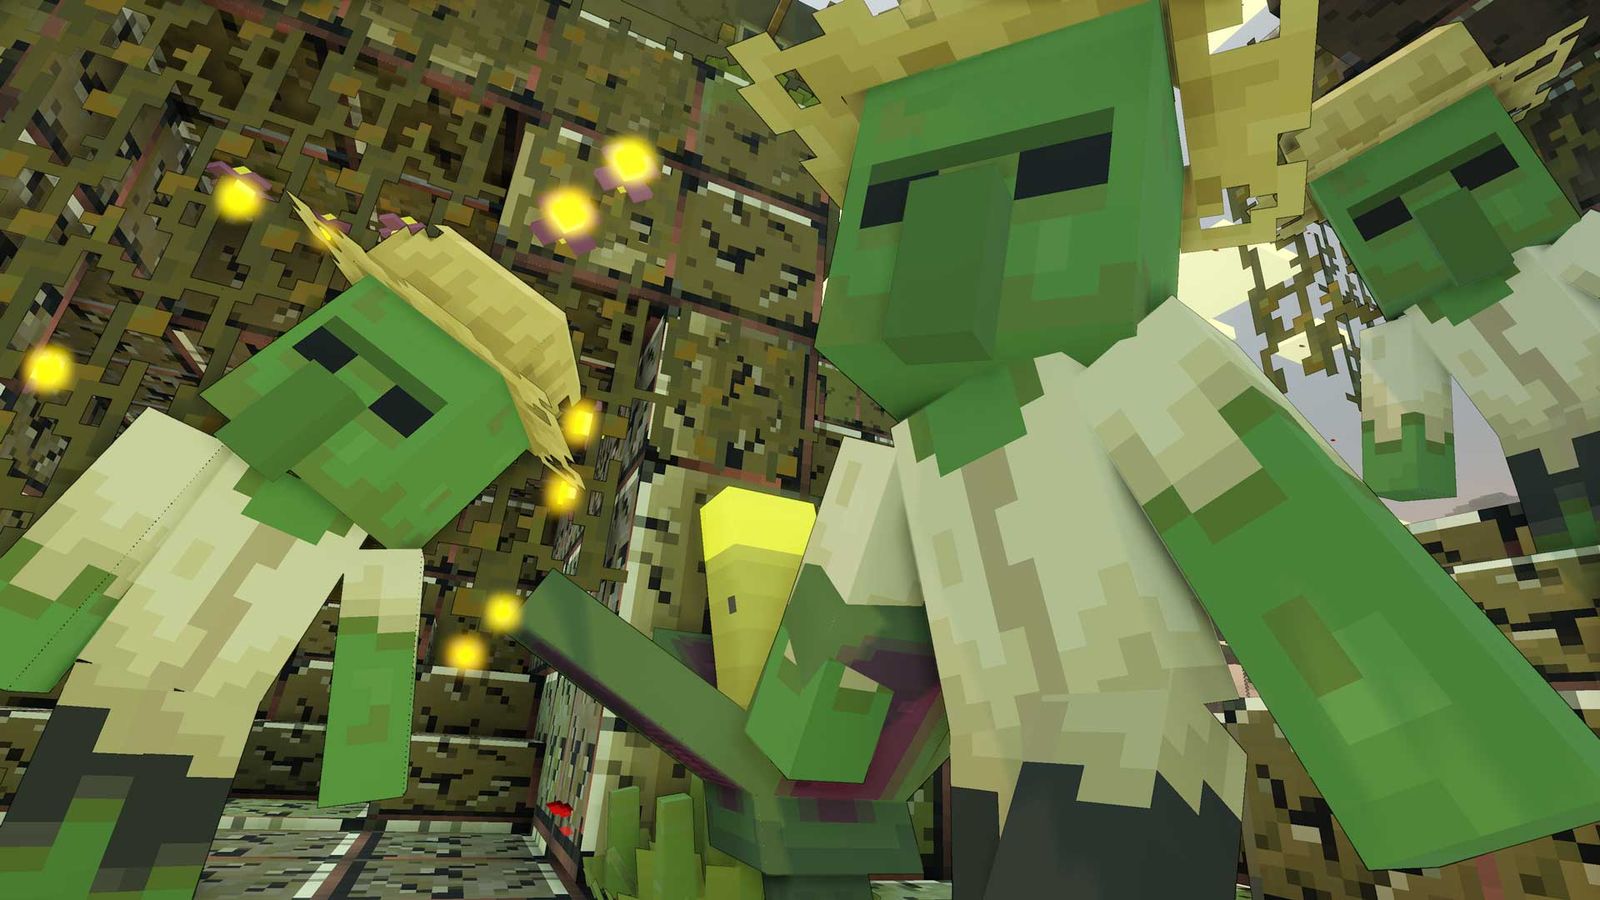 Minecraft Zombies freed from prison.